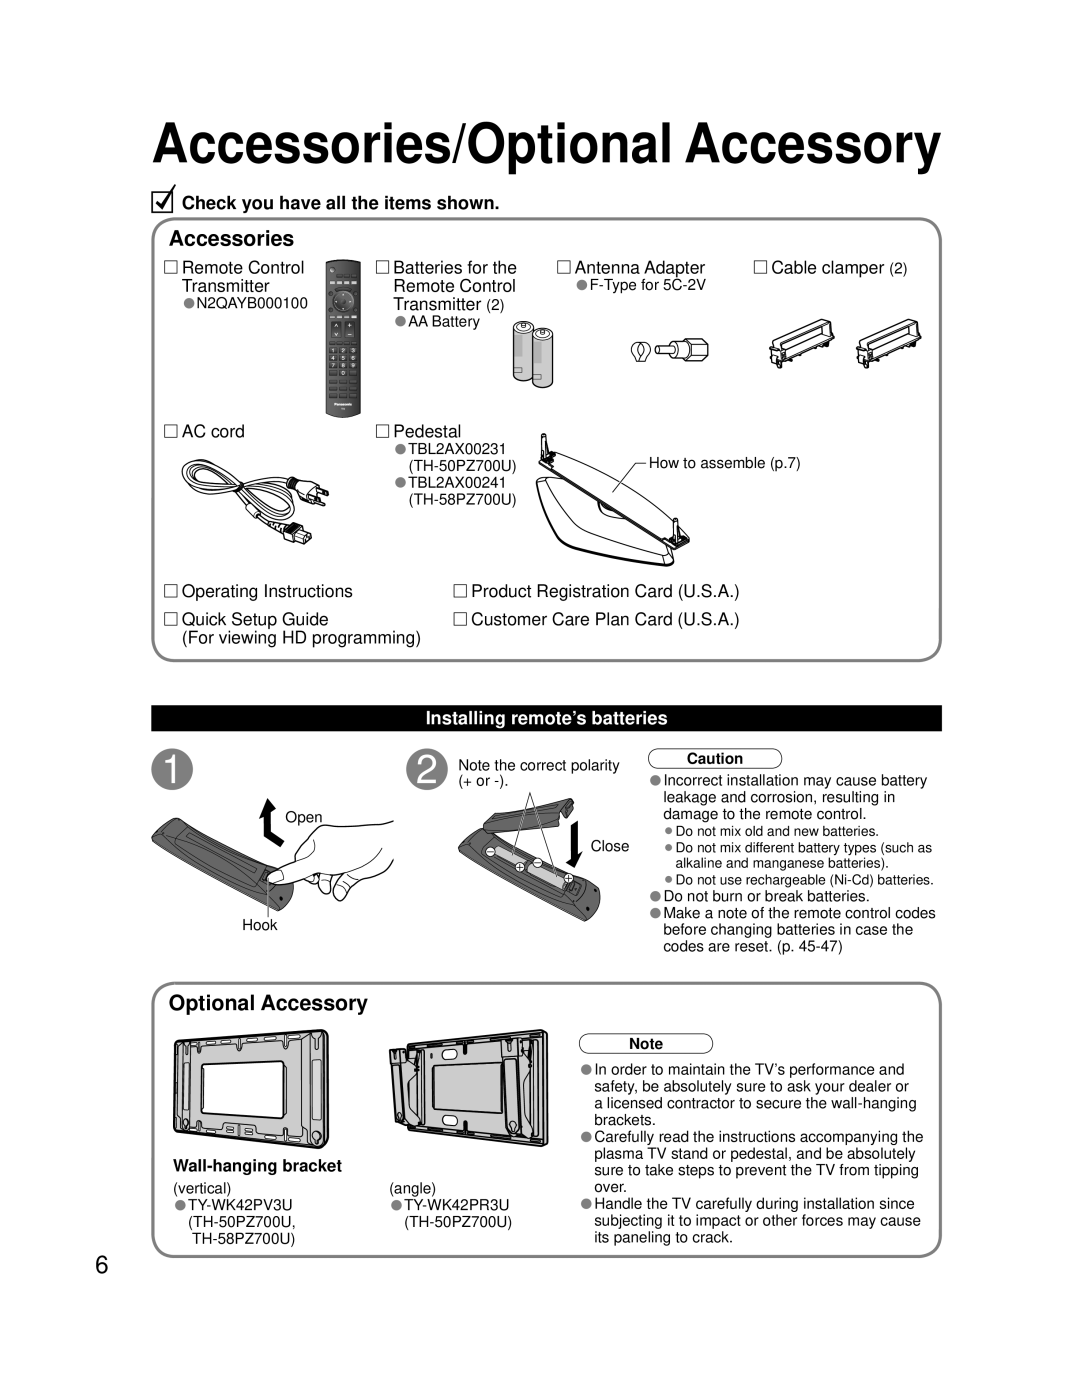 Panasonic TH 58PZ700U Accessories/Optional Accessory, Check you have all the items shown, Installing remote’s batteries 